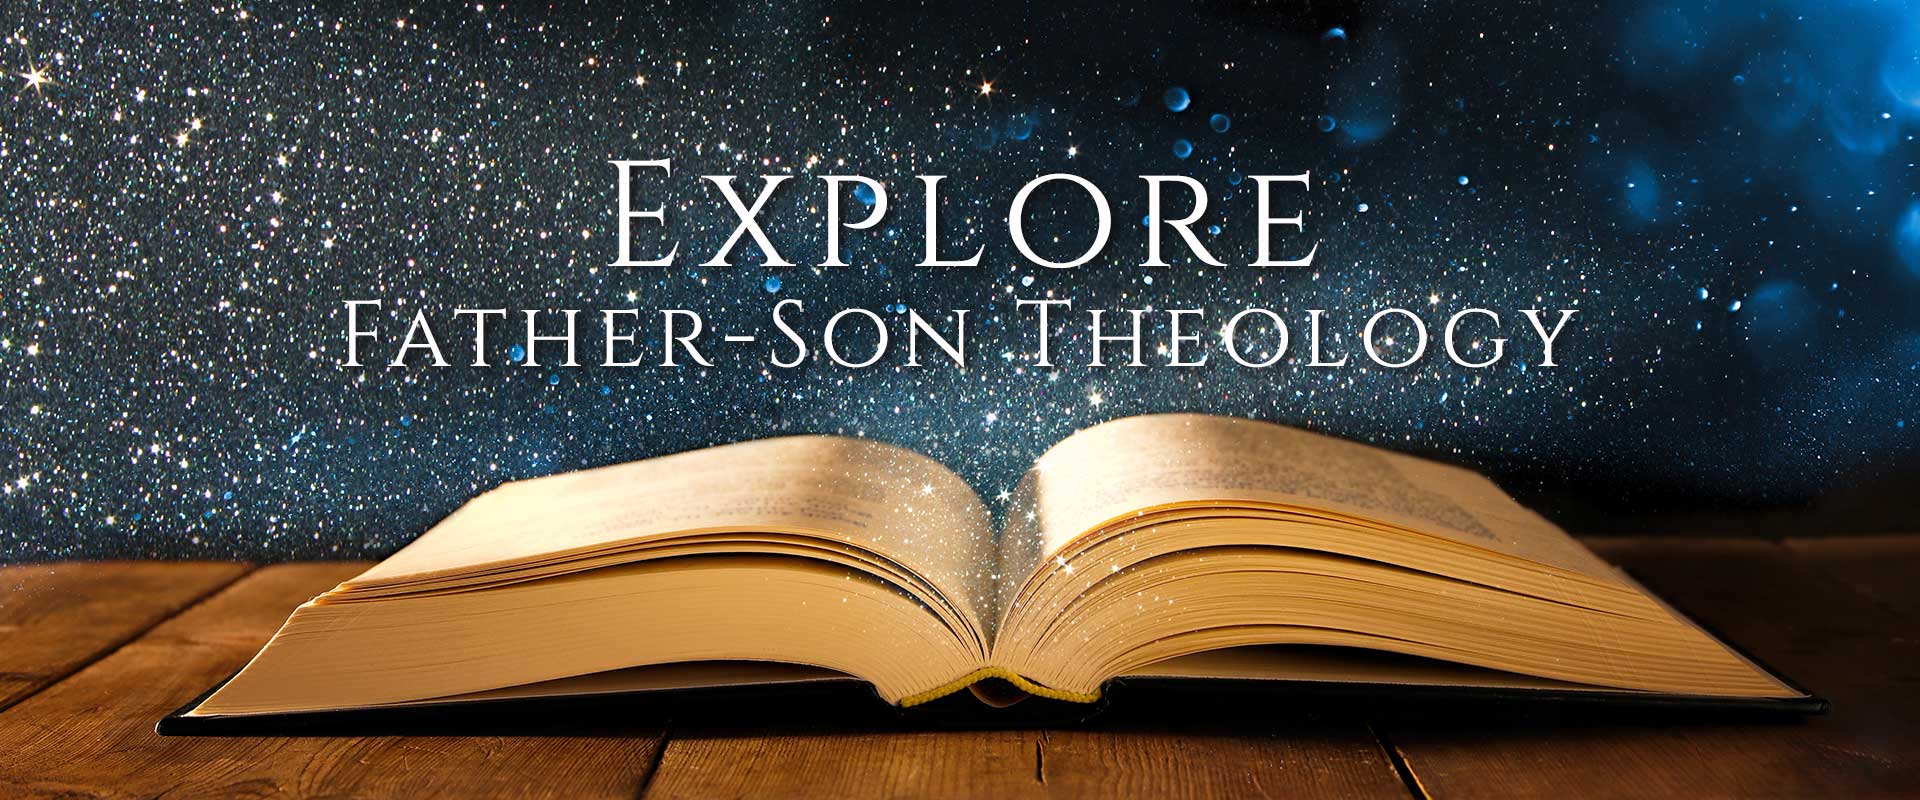 Explore Father-Son Theology